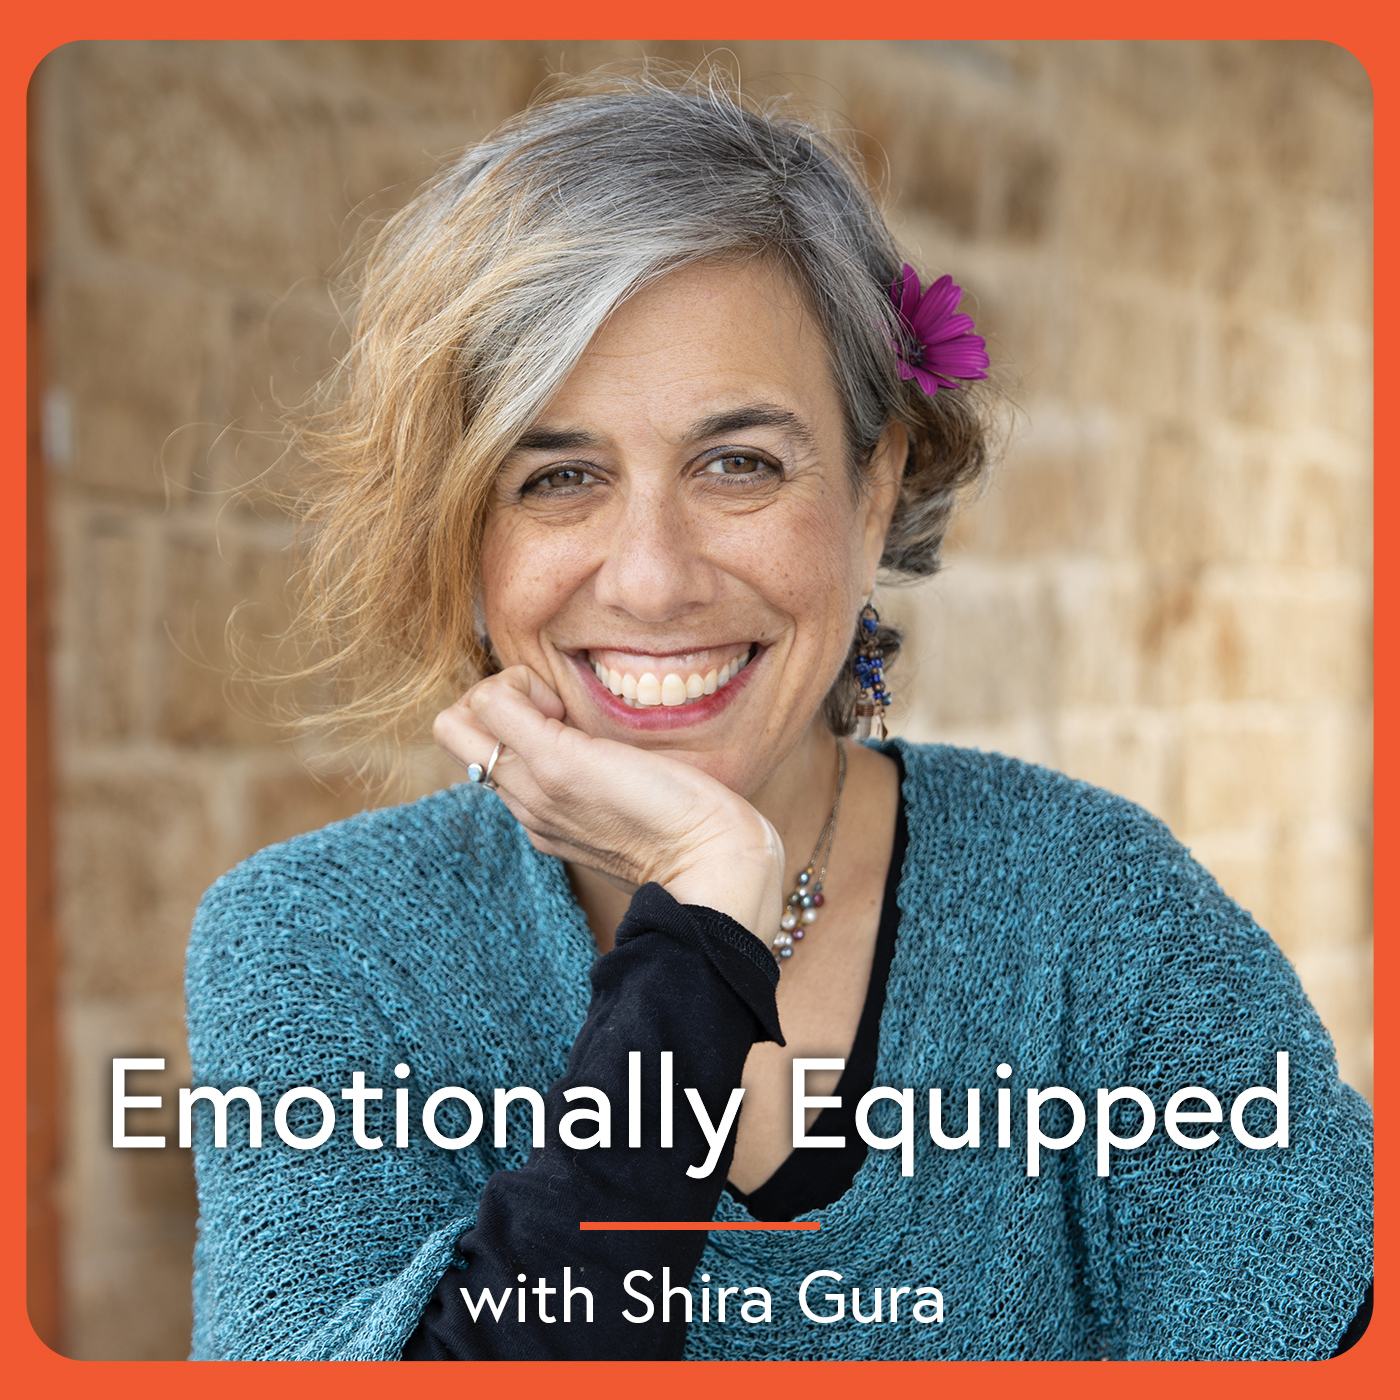 Emotionally Equipped for LIfe with Shira Gura